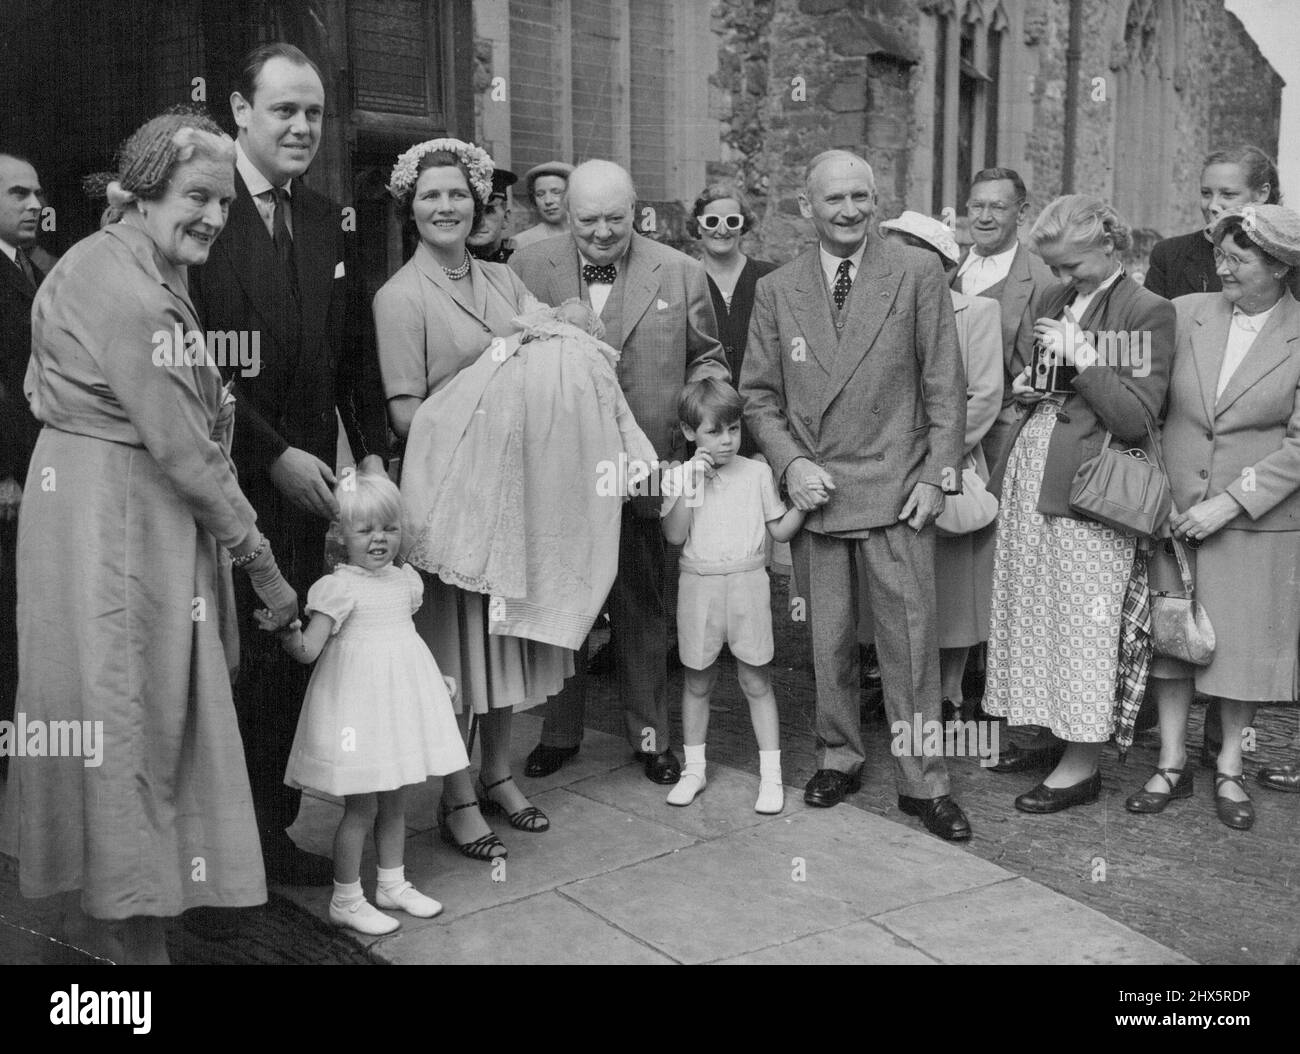 A Churchill Grandchild Is christened -- British Premier Winston Churchill beams happily with his family after the christening of his eighth grandchild, Jeremy Soames, at Westerham, Kent church to-day (Sunday). Holding the baby is the mother Mrs. Christopher Soames (formerly Mary Churchill, daughter of the Premier). A godfather, Field Marshal Viscount Montgomery clasps the hand of the baby's brother, Nicholas. At left is Mrs. Clementine Churchill, wife of the Premier, holding the baby's sister, Emma, with Captain Christopher Soames. August 17, 1952. (Photo by Reuterphoto). Stock Photo